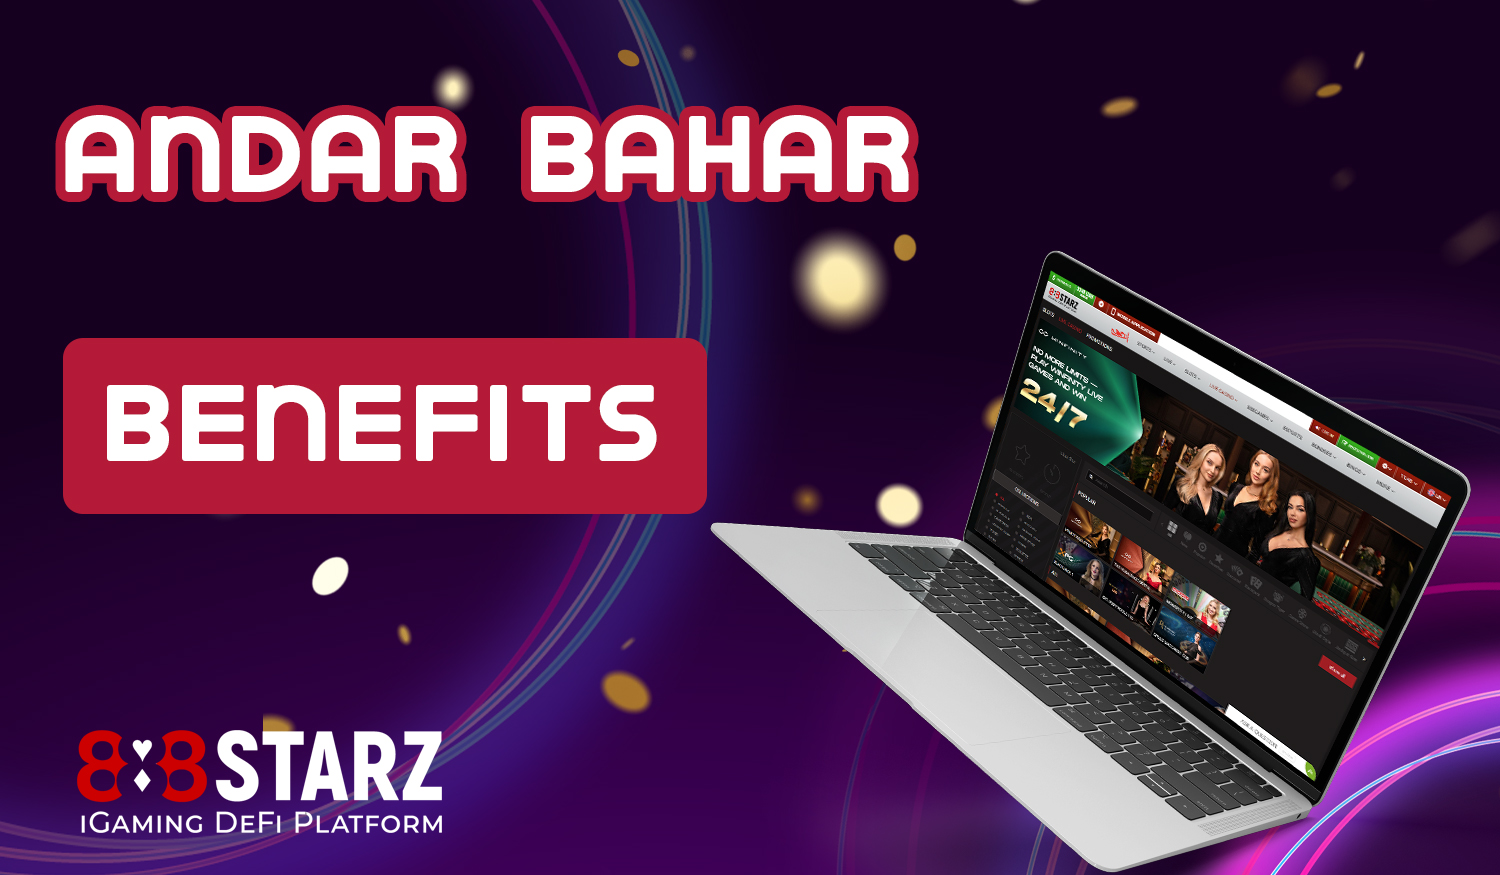 What are the benefits of 888Starz online casino for playing Andar bahar